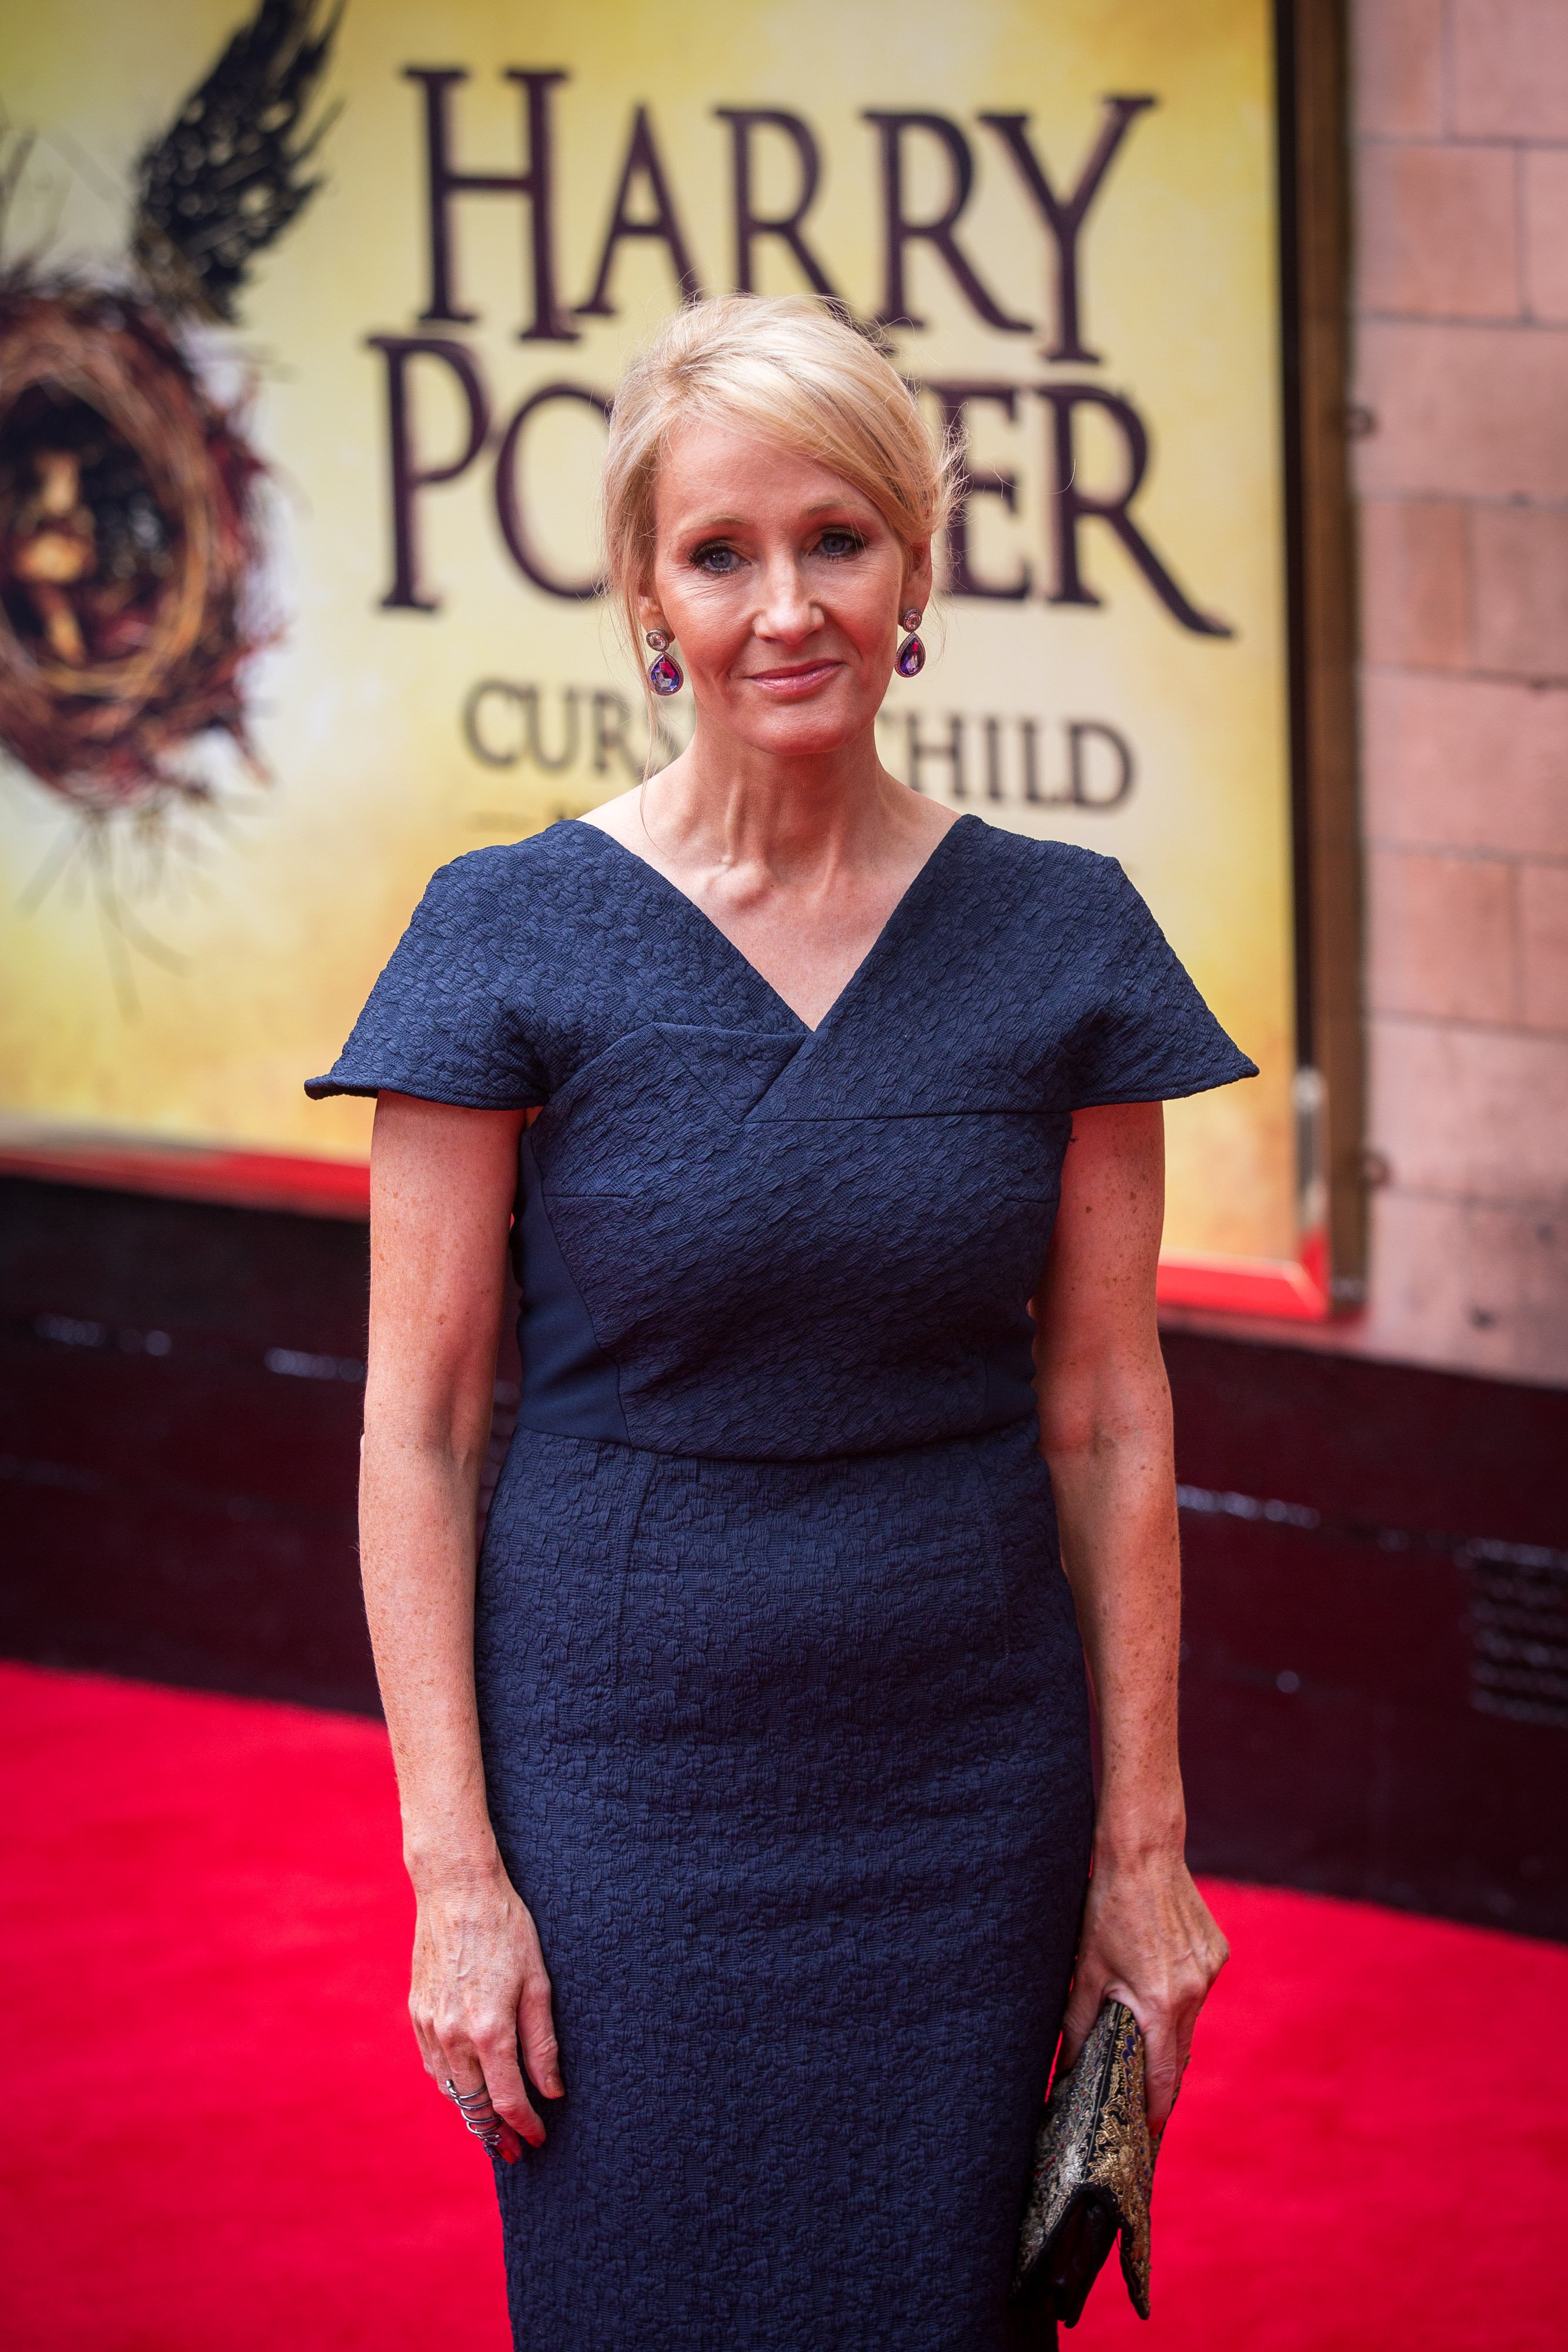 J. K. Rowling debuts 'Harry Potter & The Cursed Child' on July 30, 2016